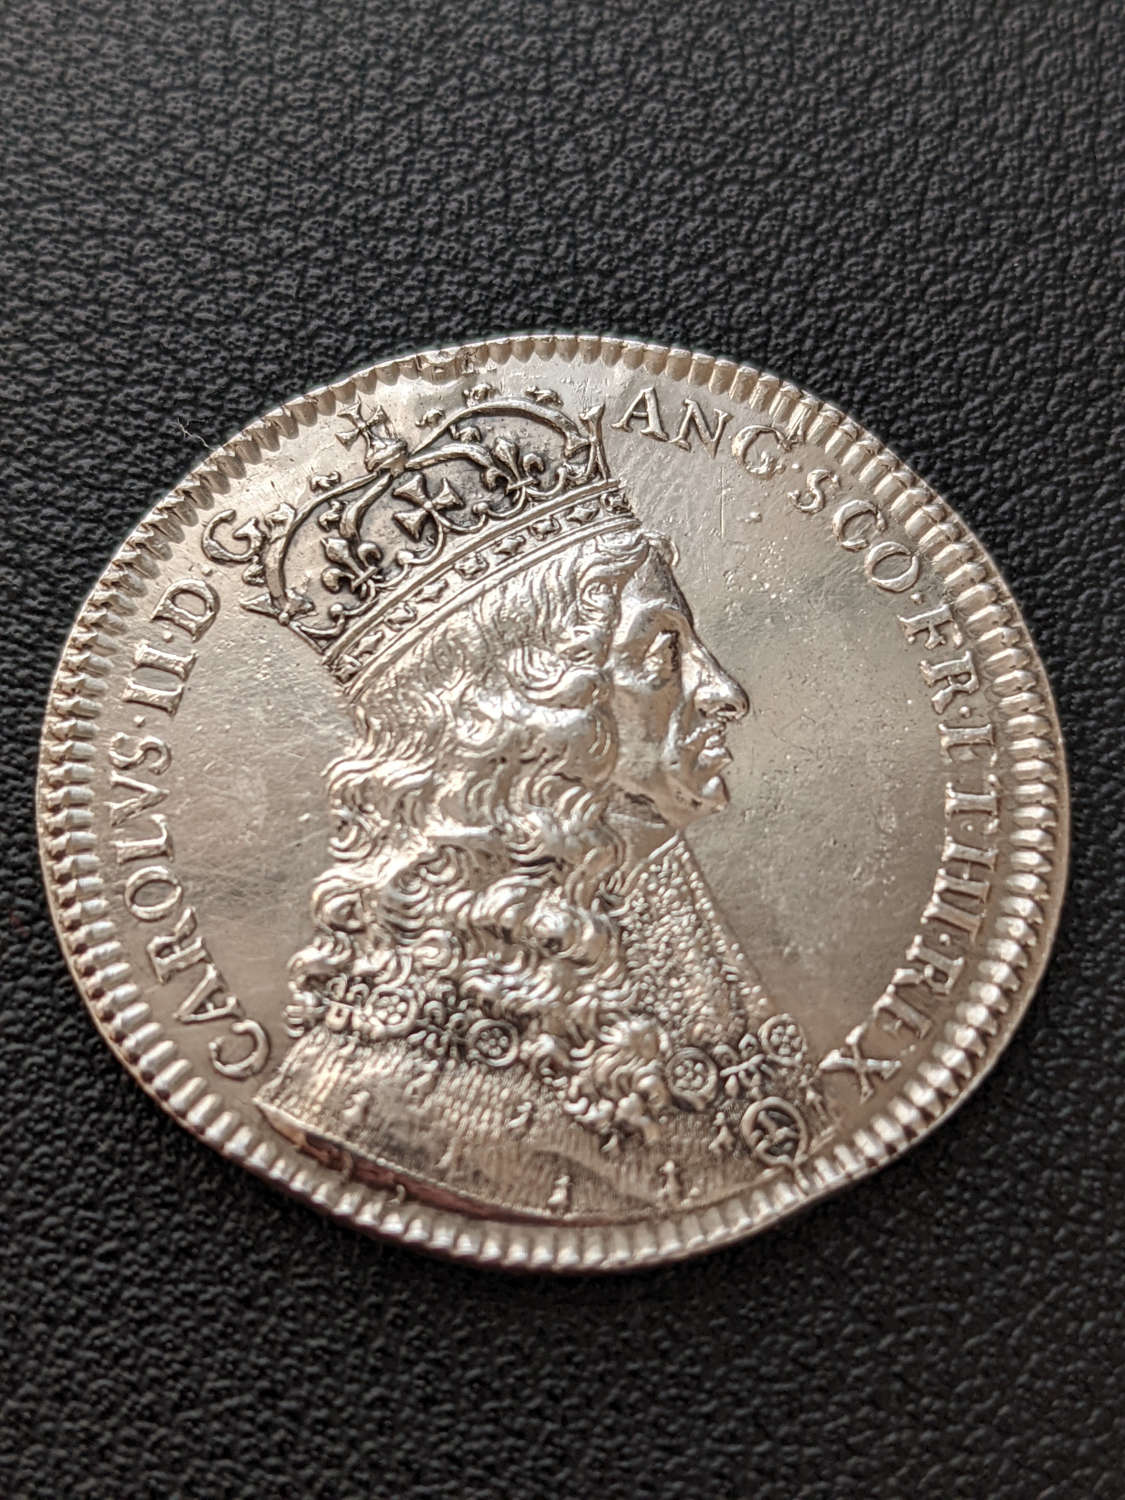 Charles II Official Royal Mint Silver Coronation Medallion 1661